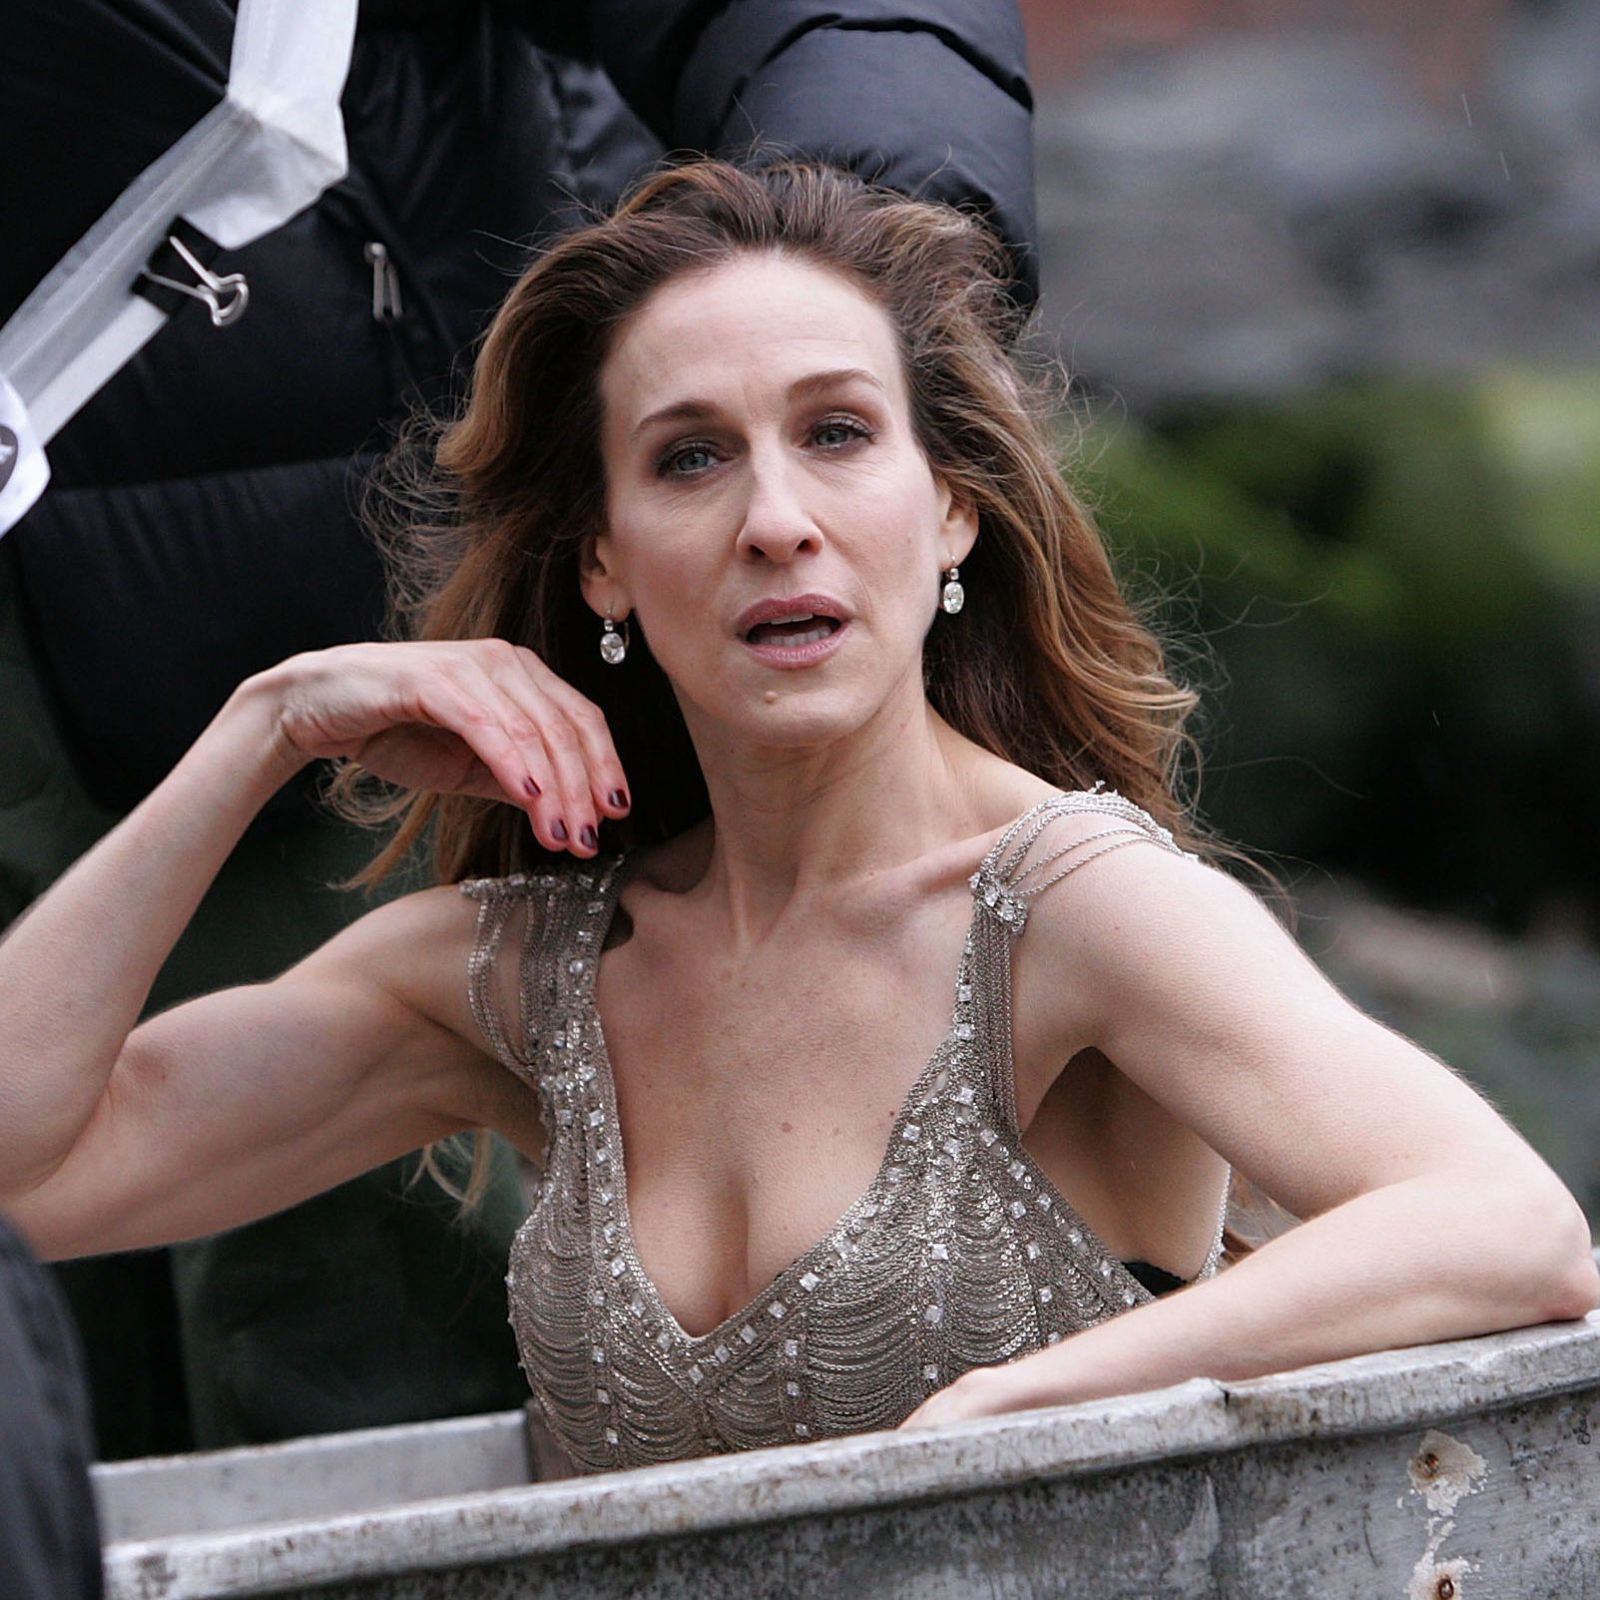 Sarah Jessica Parker Details How She Wept As Producers Tried To Get Her To Film Nude picture